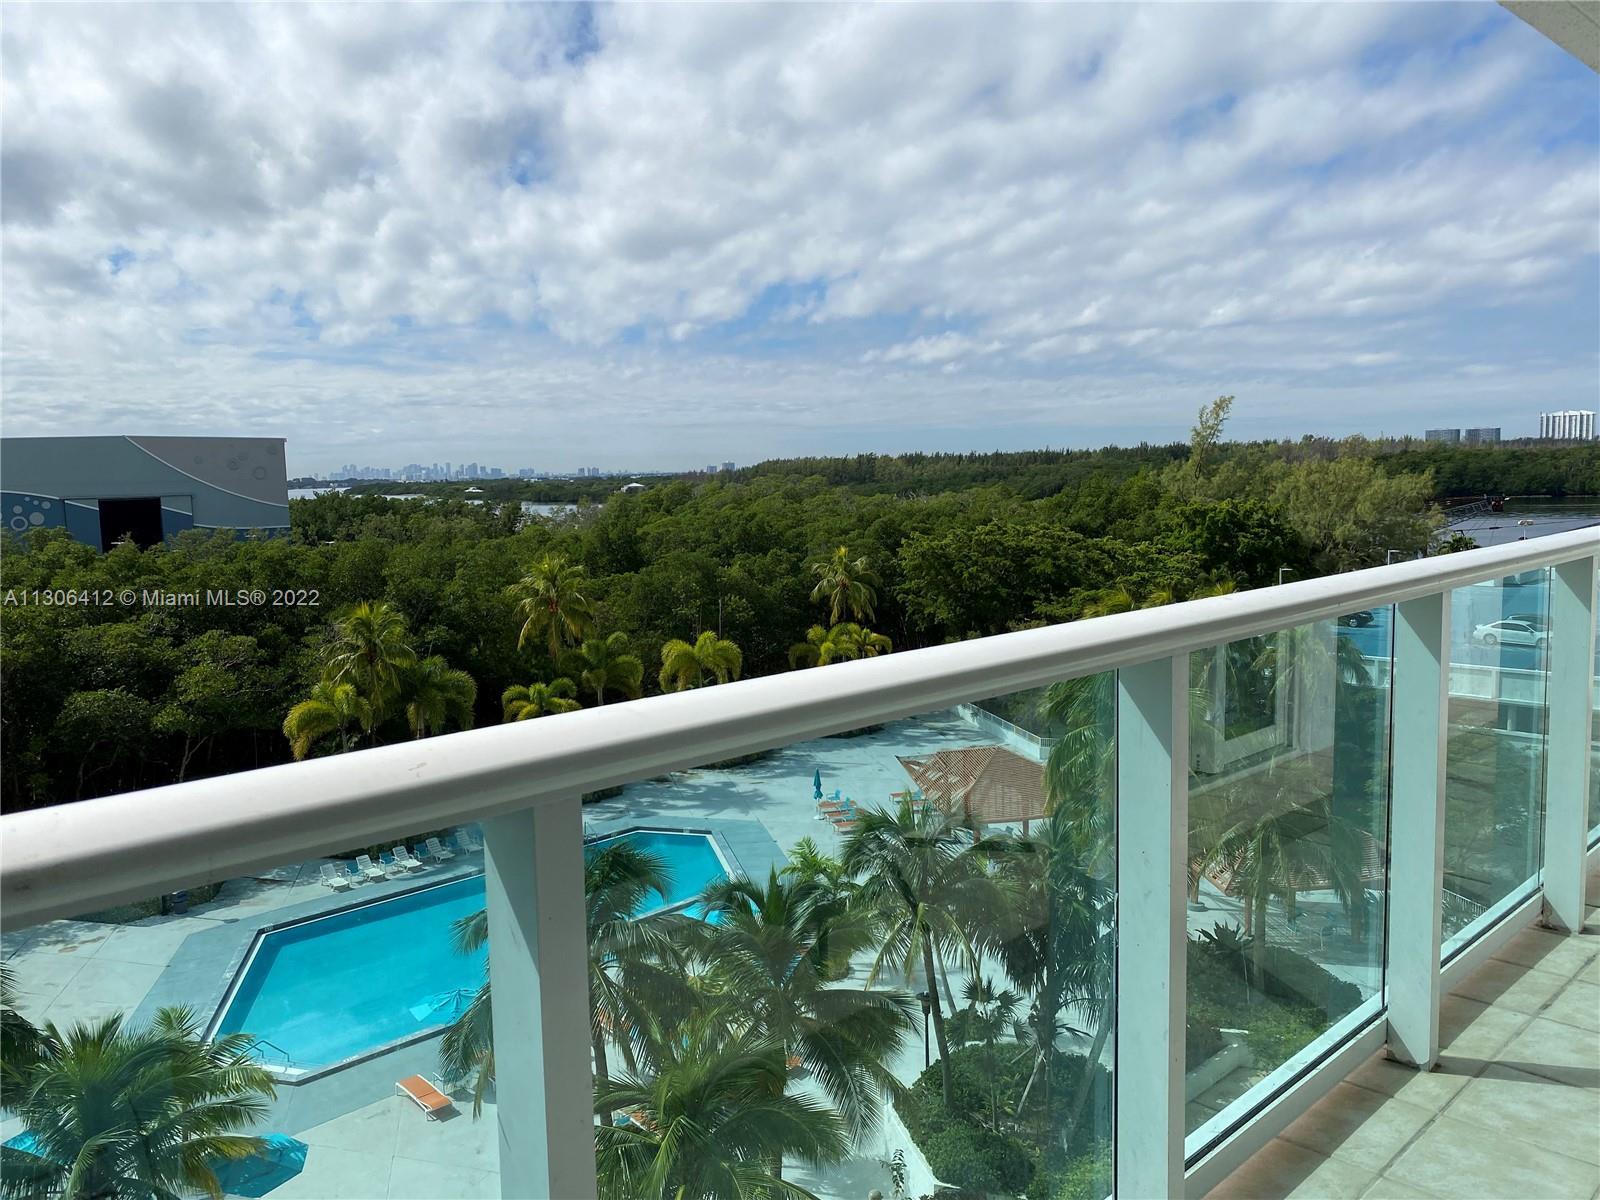 RENOVATED UNIT WITH BRAND NEW VINYL FLOORS THROUGHOUT THE UNIT AND VIEWS OF THE POOL AND INTRACOASTA